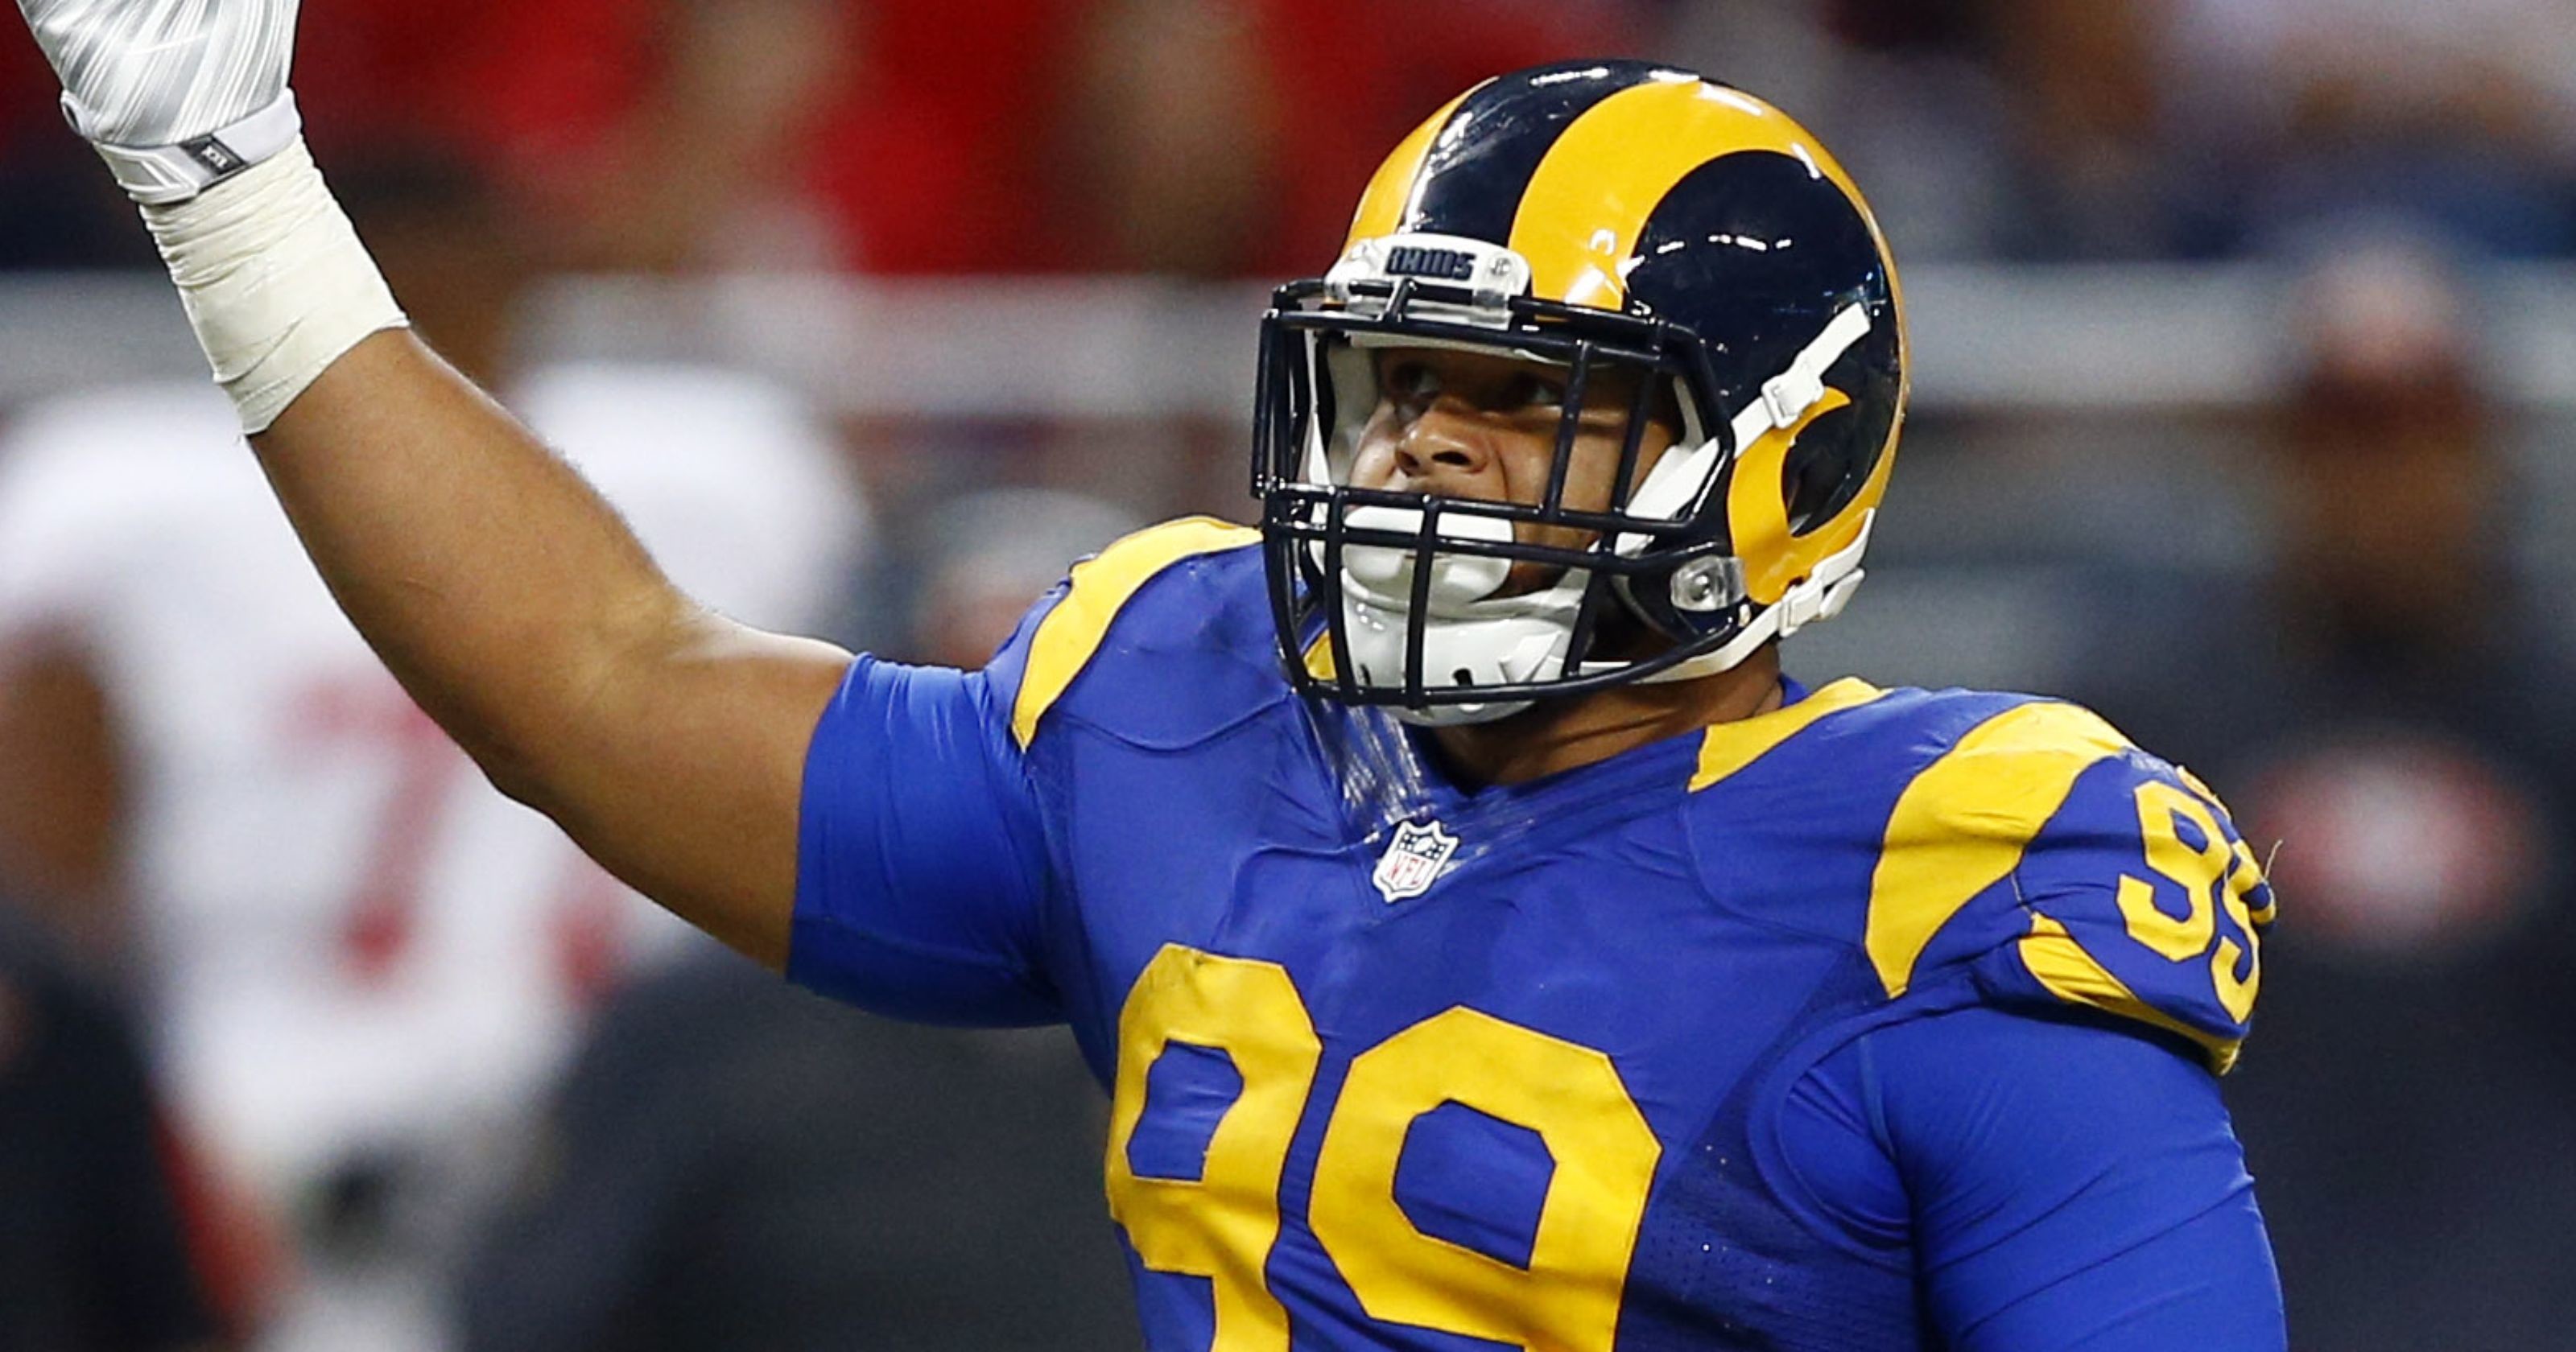 Warren Sapp thinks Aaron Donald is the closest player to him today downtownrams